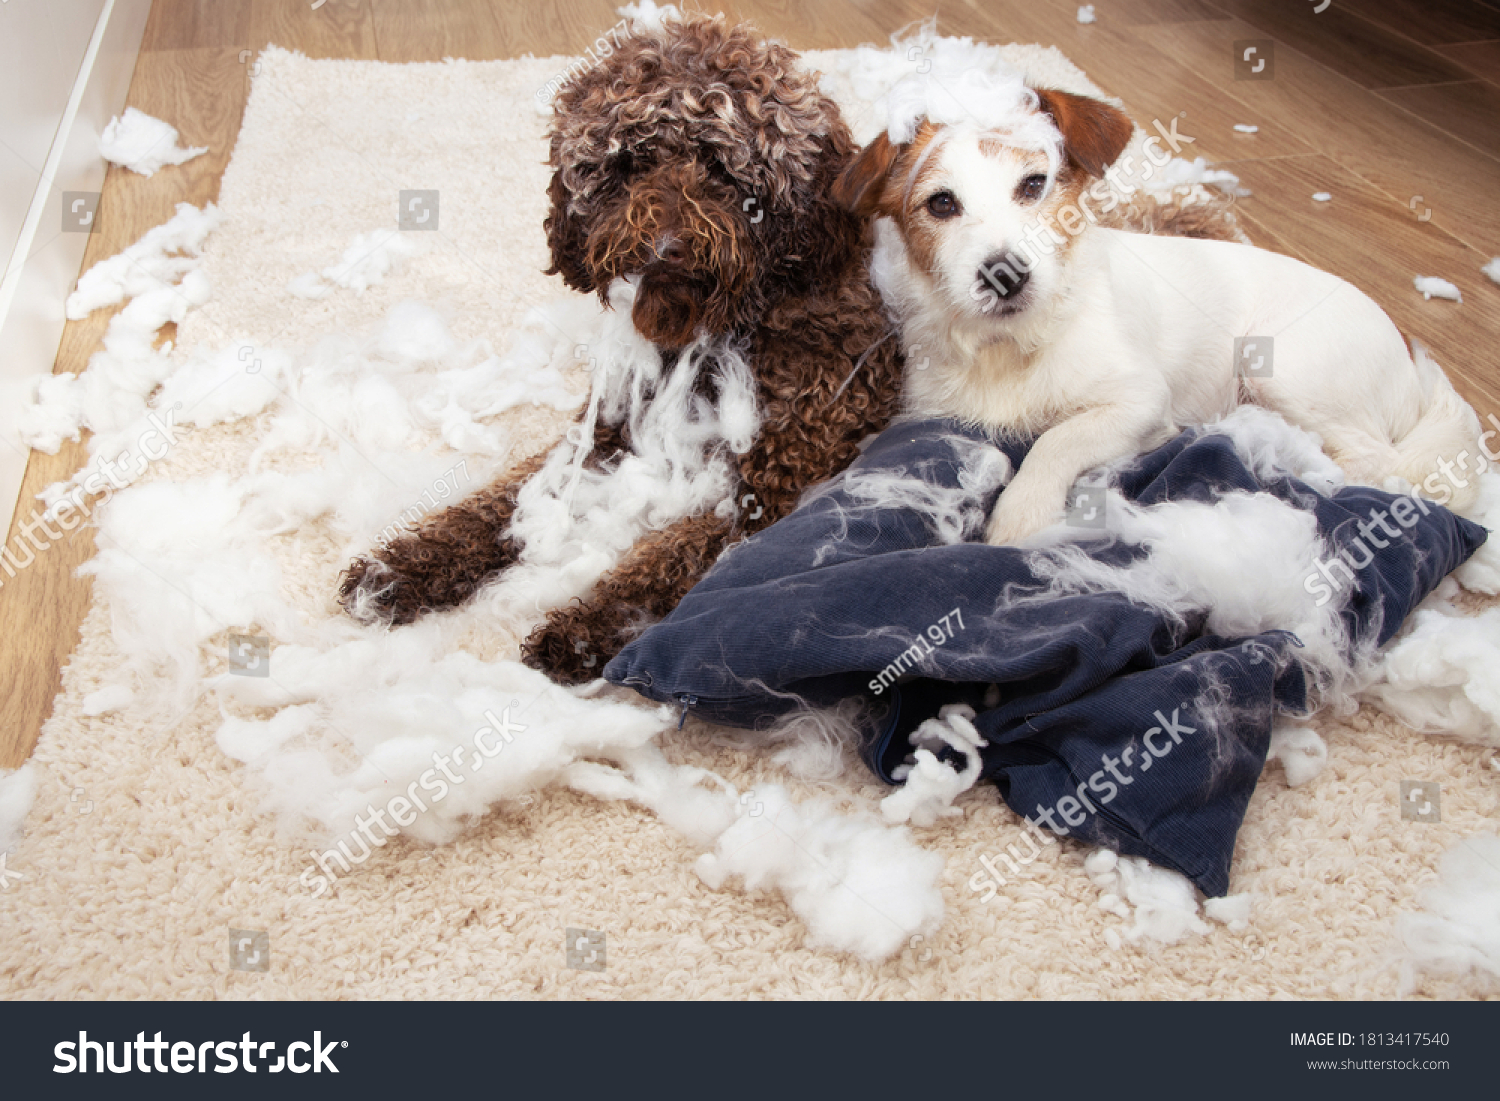 Dog mischief. Two dogs with innocent expression after destroy a pillow. separation anxiety and obedience training concept. #1813417540